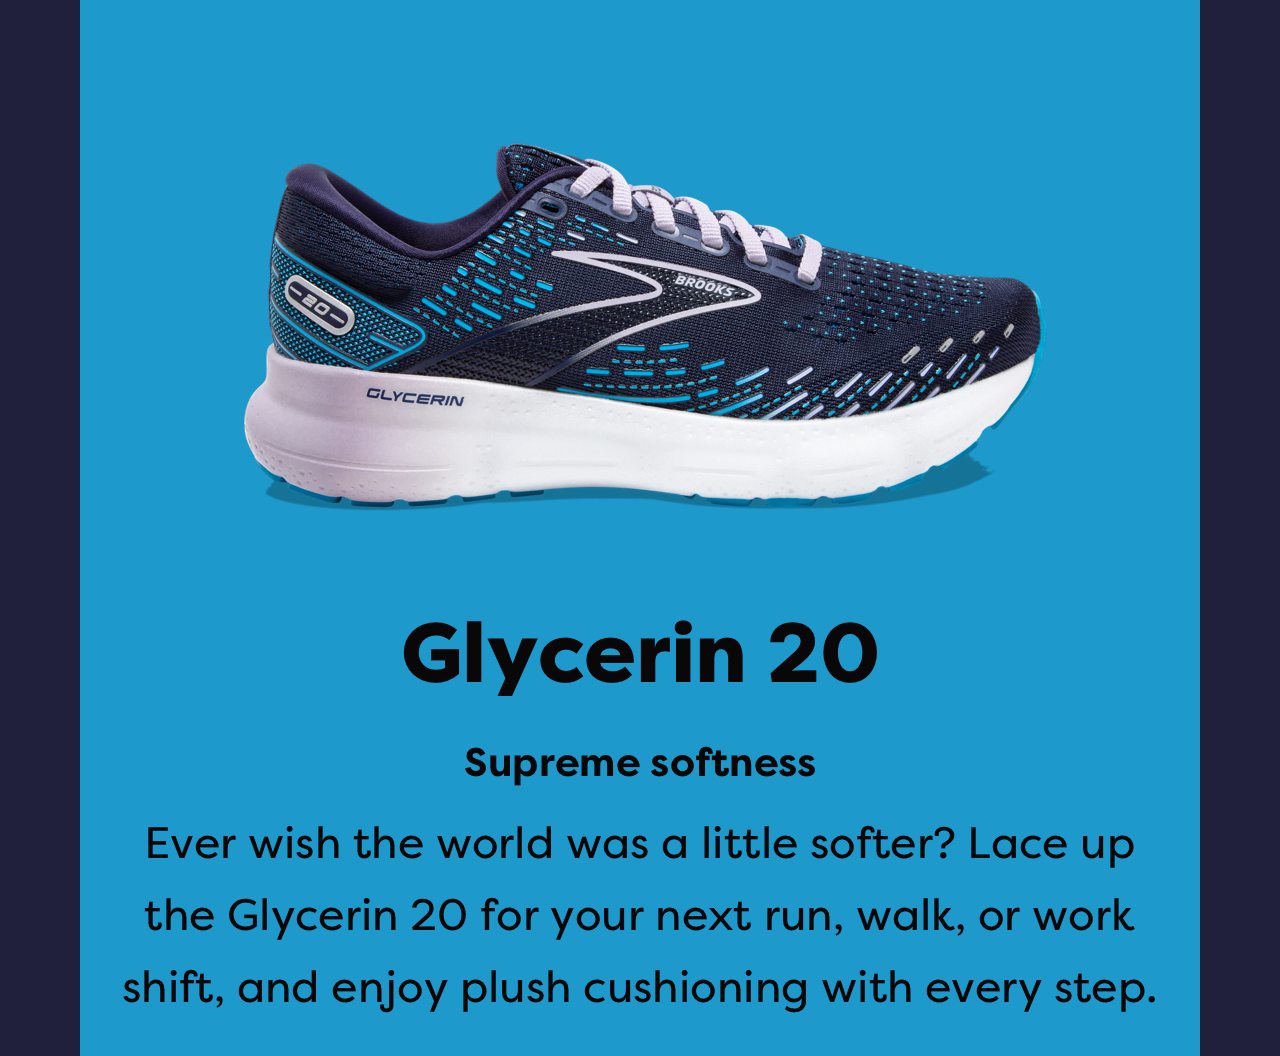 Glycerin 20 Supreme softness | Ever wish the world was a little softer? Lace up the Glycerin 20 for your next run, walk, or work shift, and enjoy plush cushioning with every step.